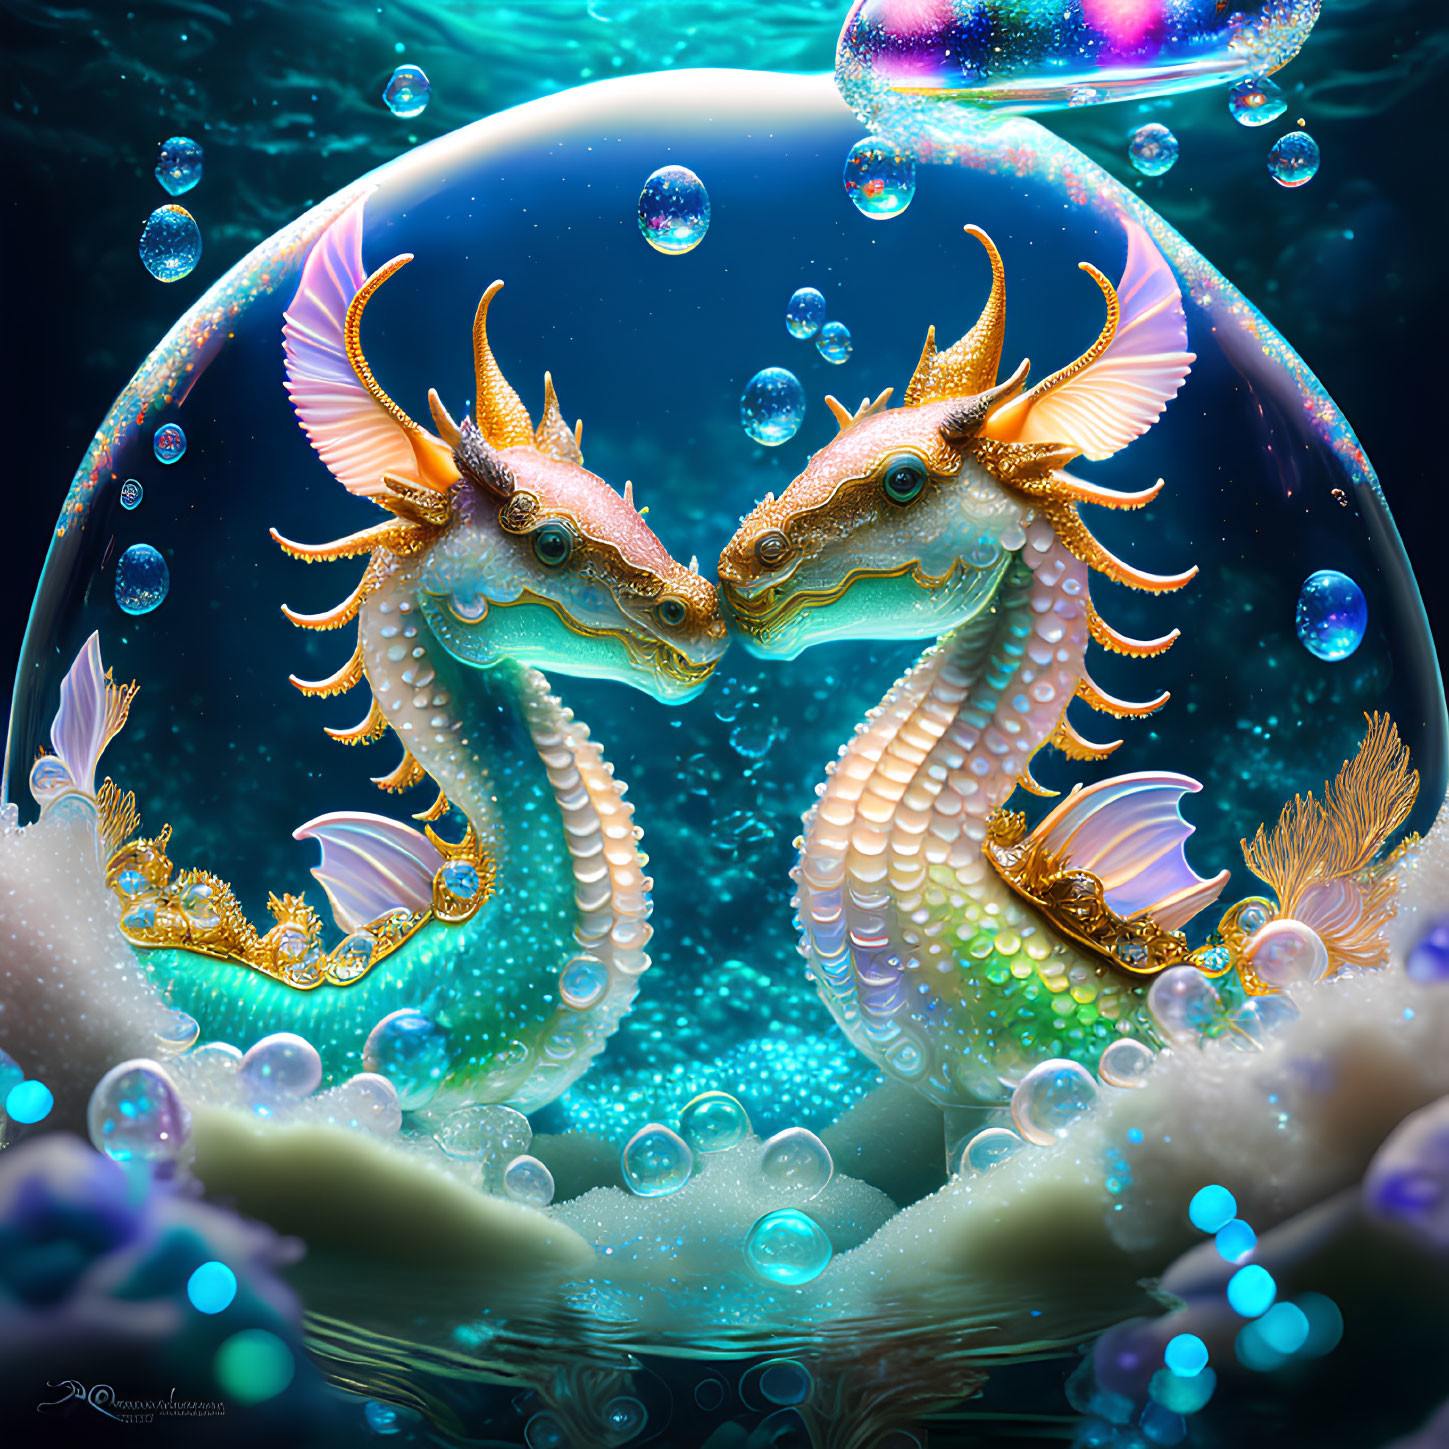 Intricately designed dragon artwork with horns and feathers in underwater setting